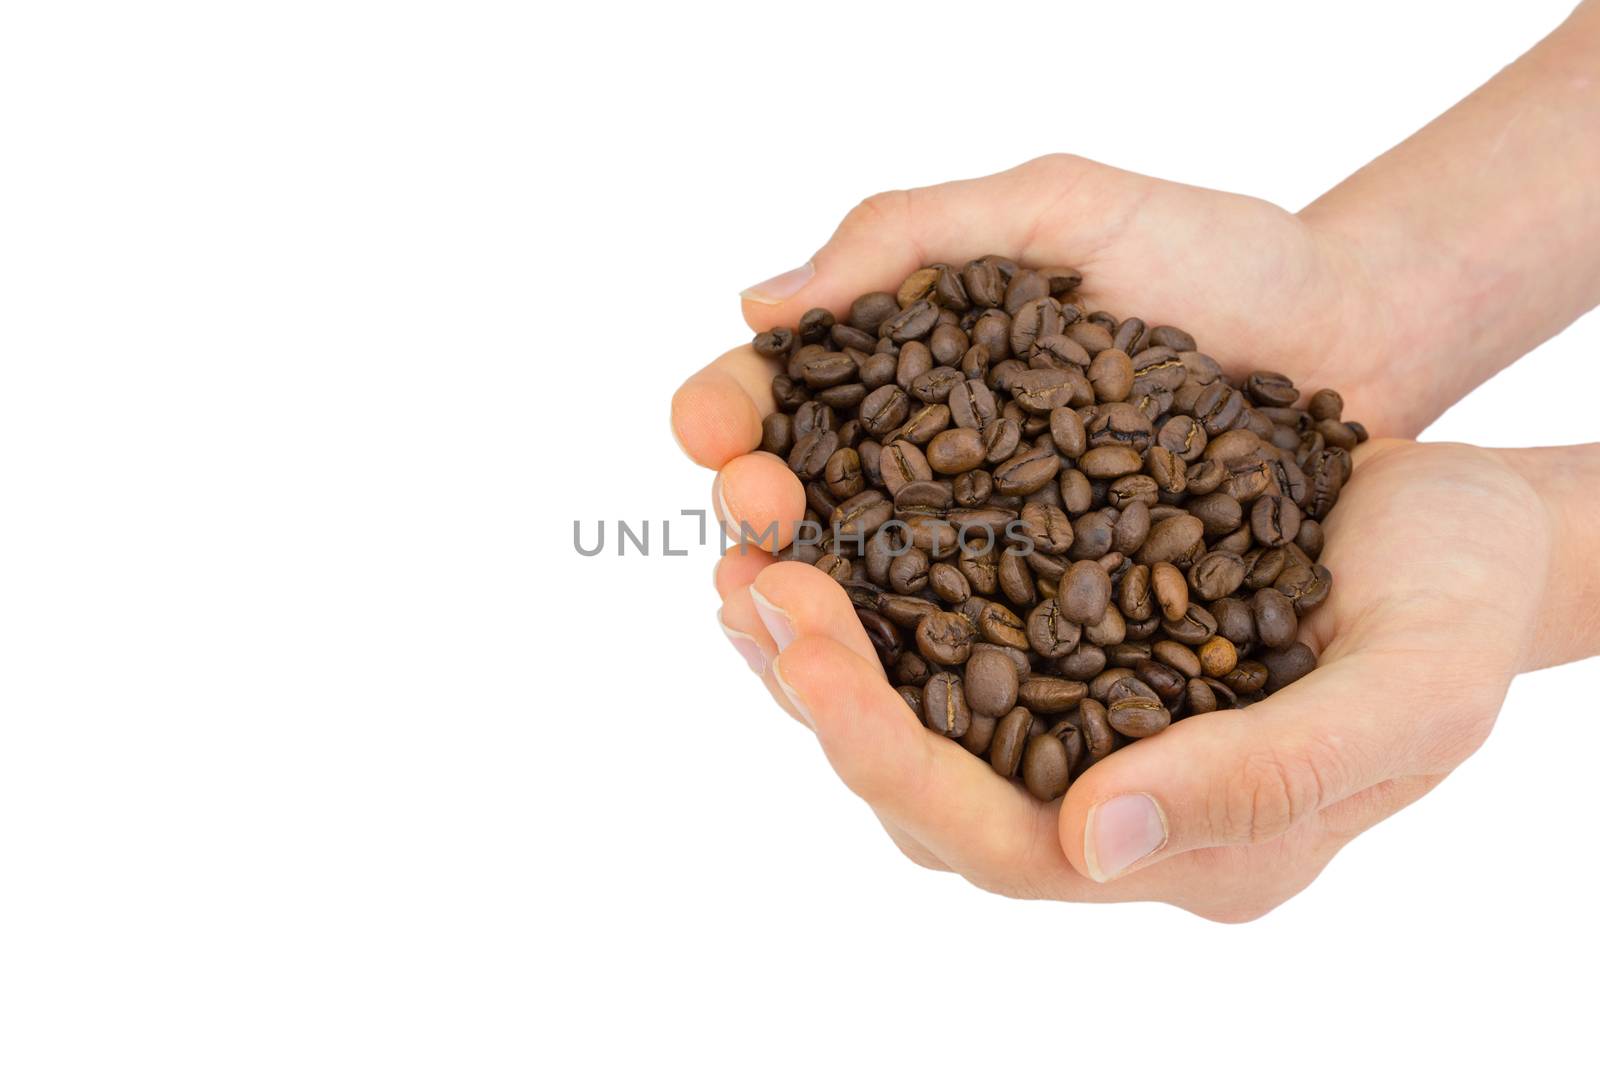 Two hands holding many coffee beans isolated on white background